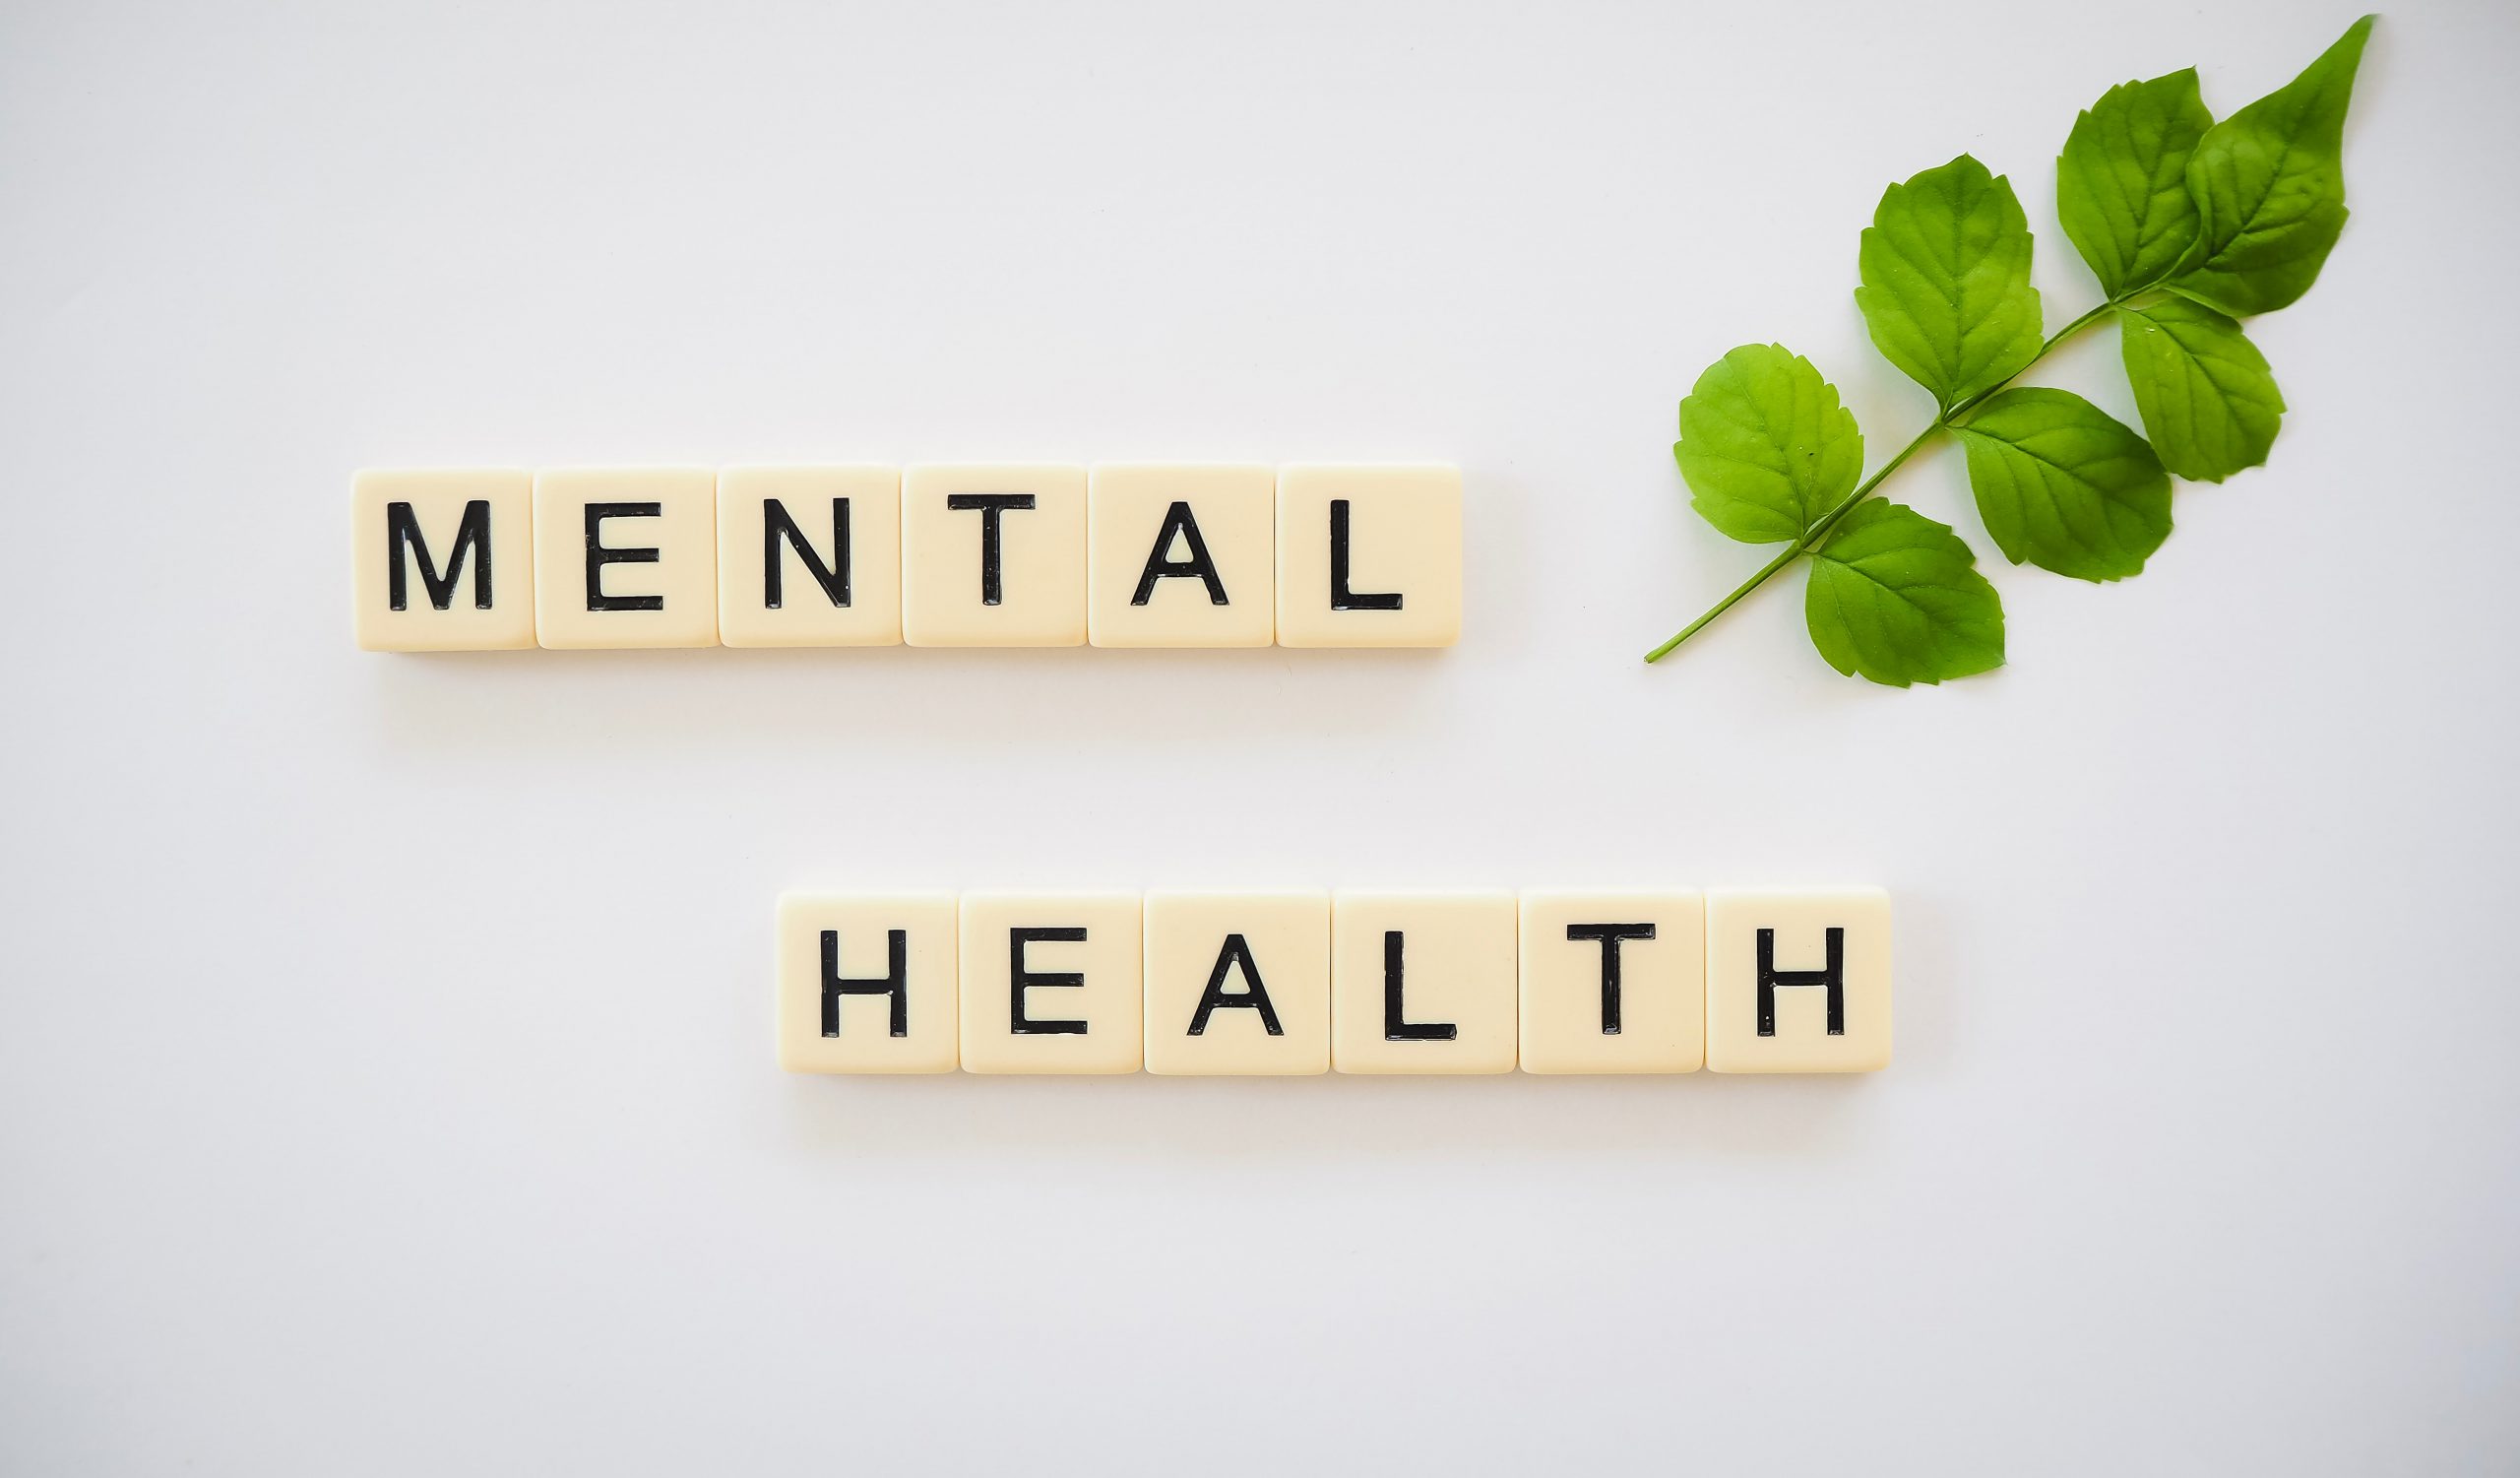 Mental health care for all: let’s make it a reality (Mental Health in an Unequal World)